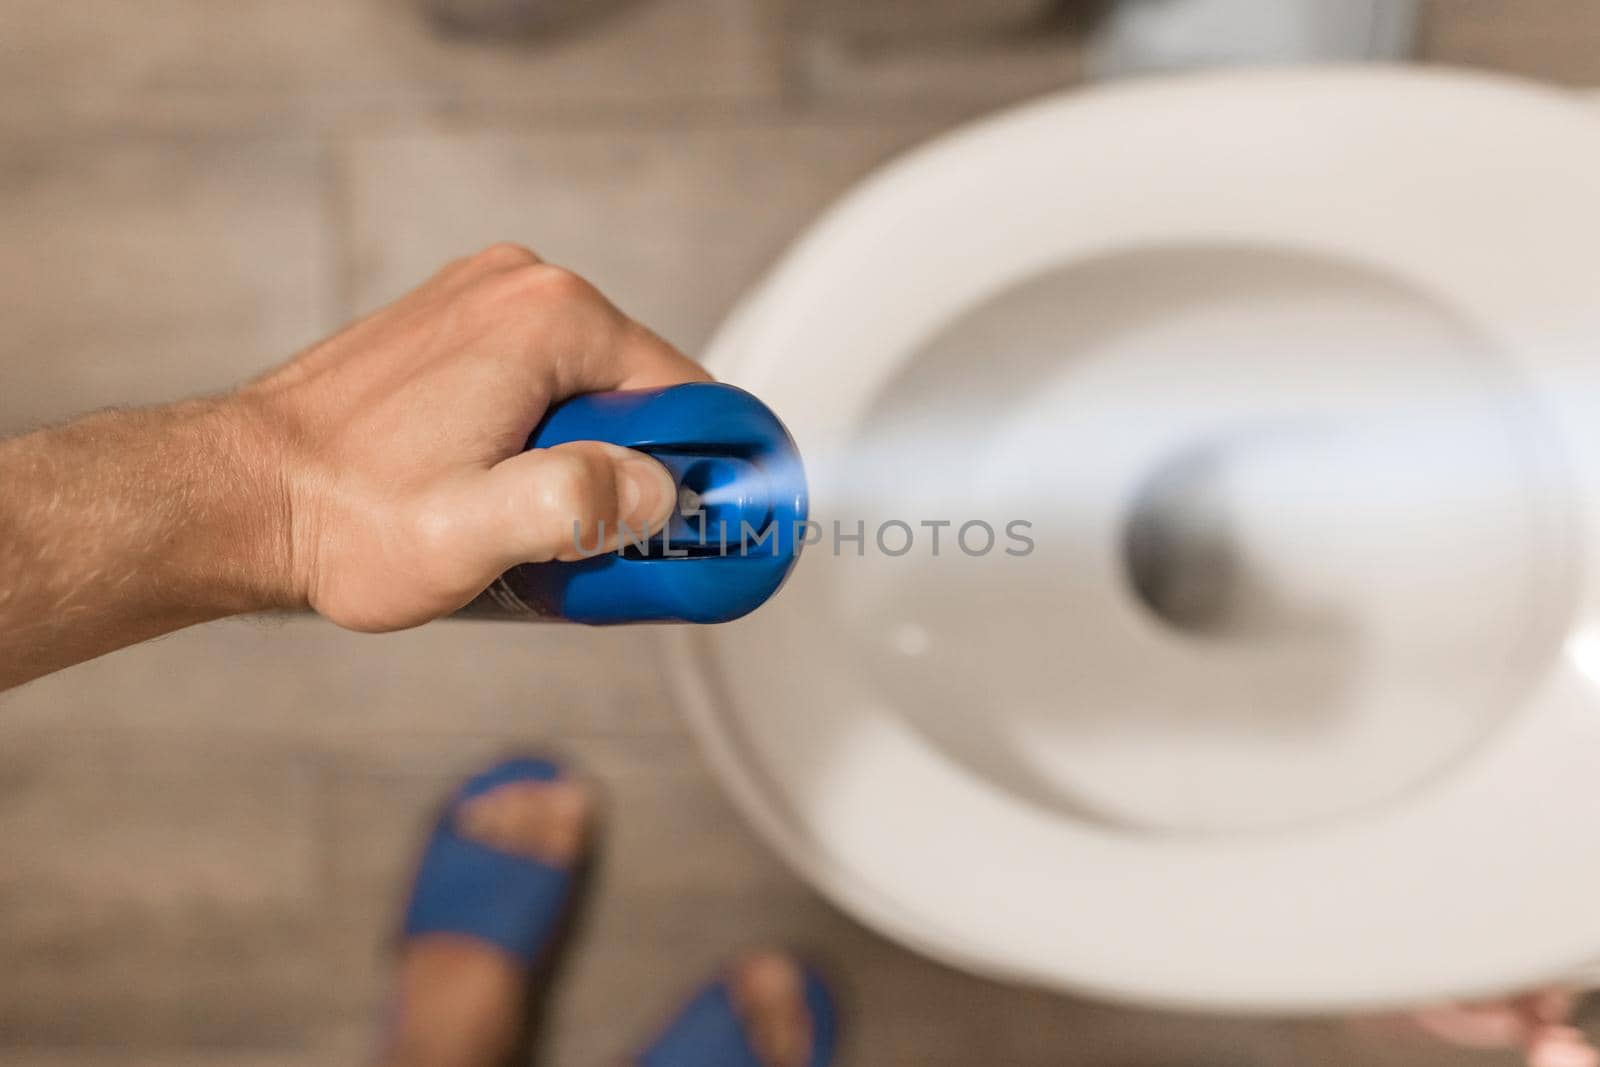 The guy's hand holds and sprays the air freshener in the toilet or bathroom. Home Hygiene Concept by AYDO8